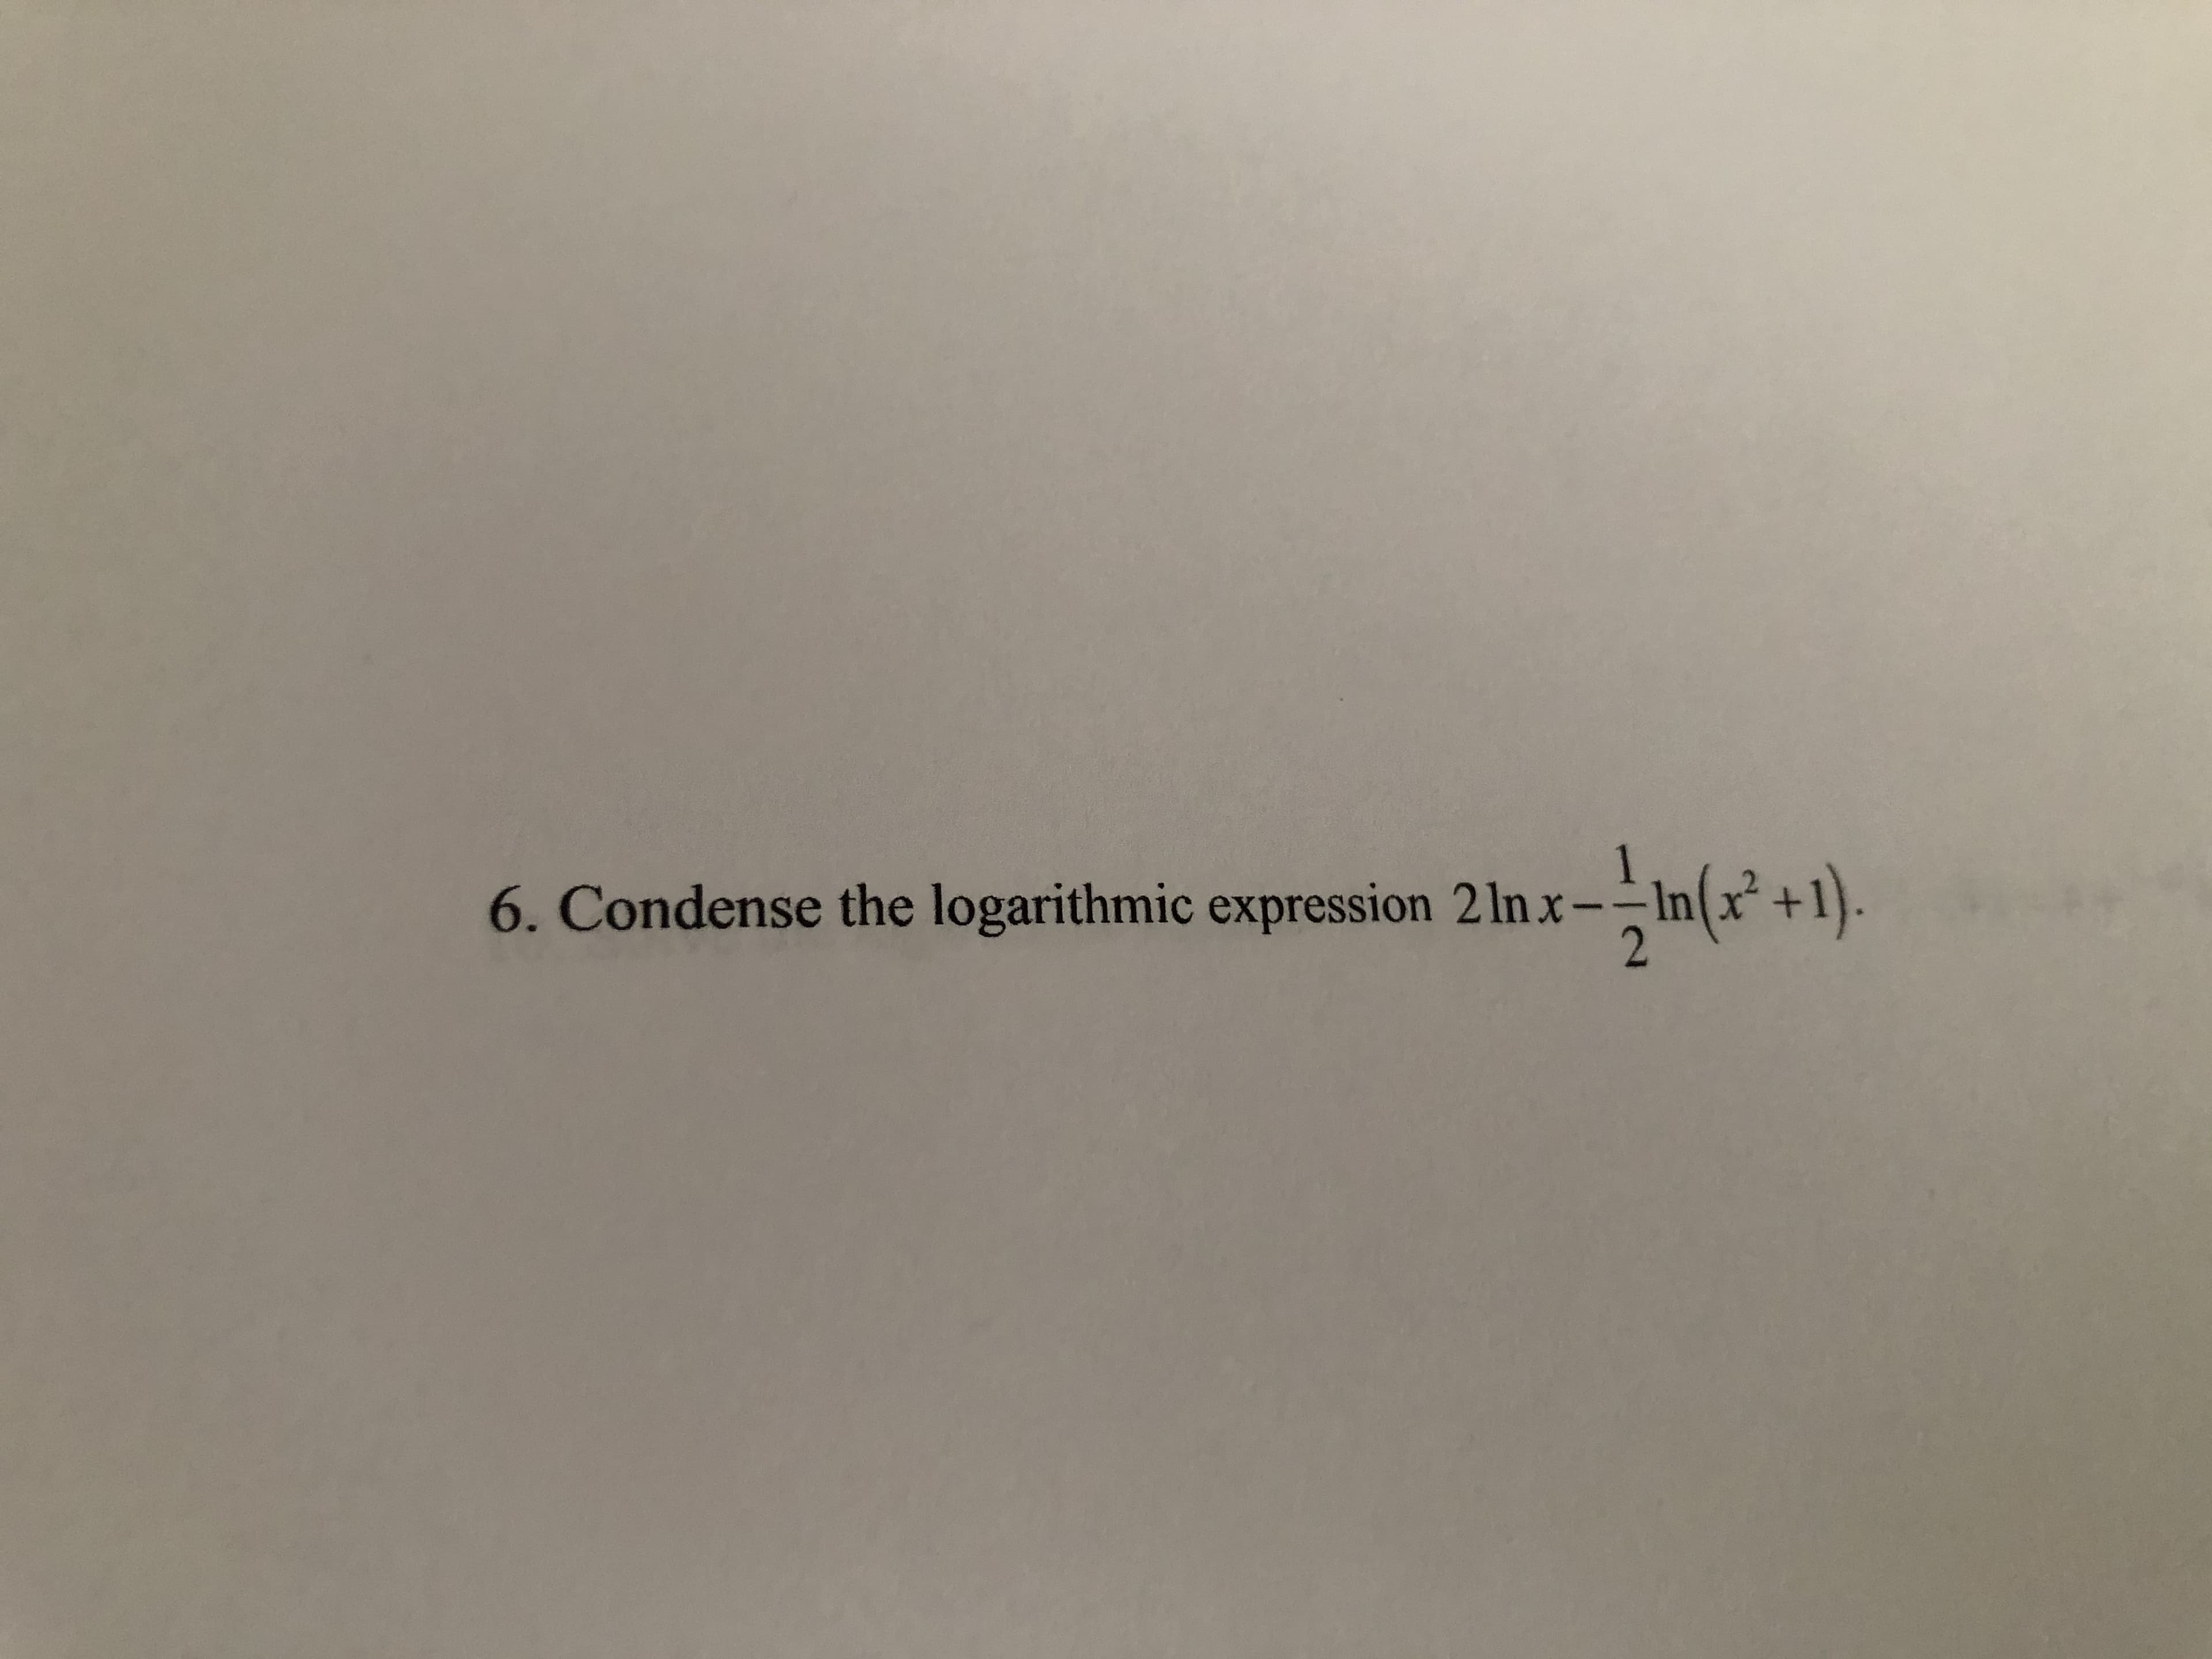 6. Condense the logarithmic expression 2 lnx-
In(x* +1).
